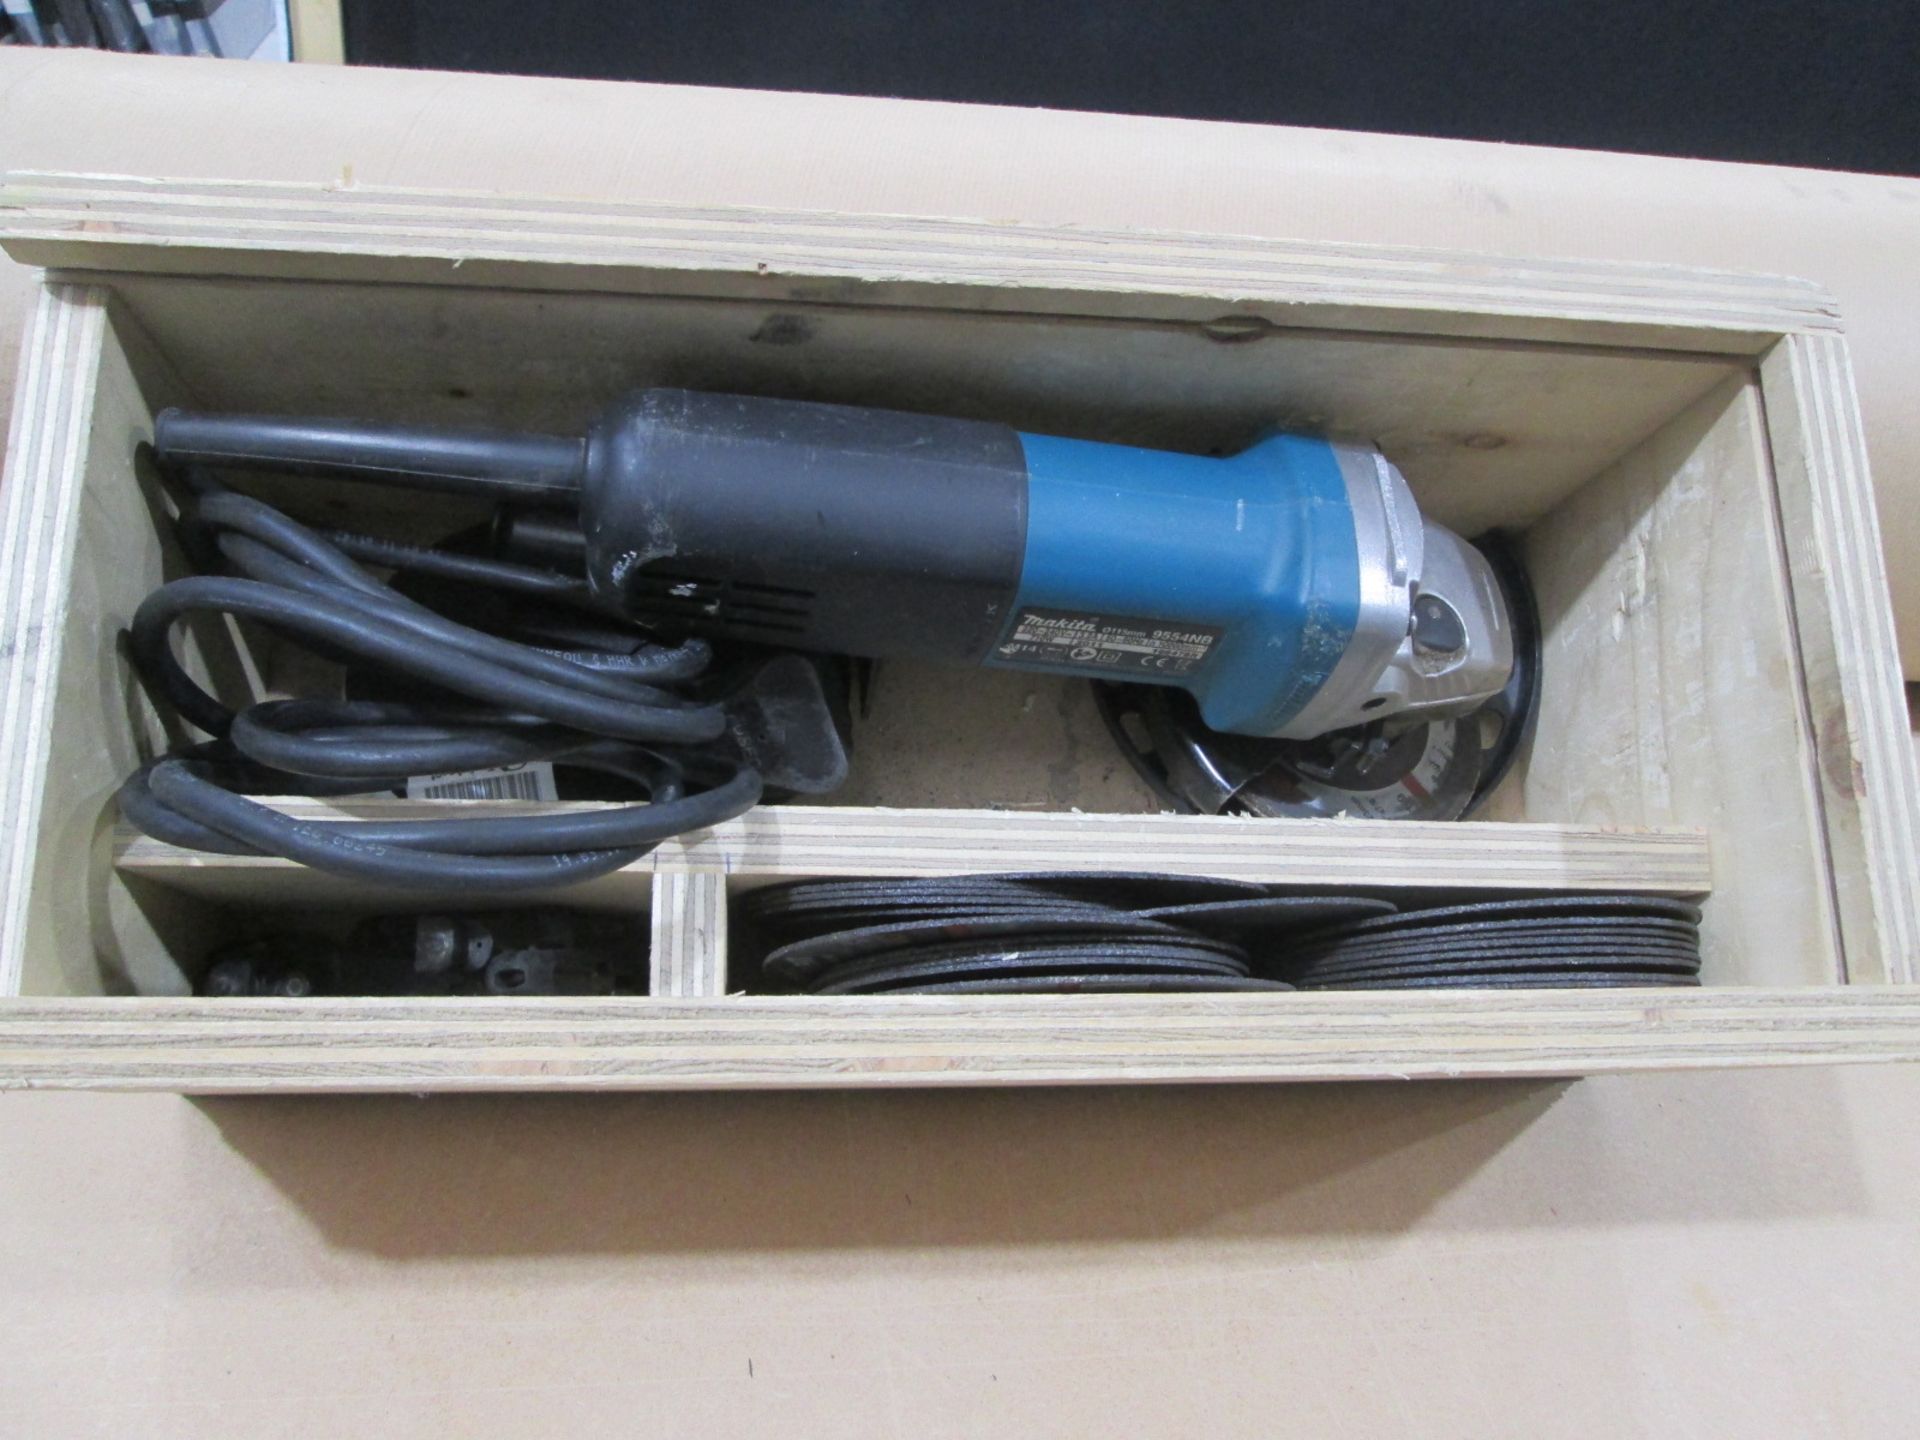 Makita 9554NB 115mm Angle Grinder, 240V, In wooden box with various disc's - Image 4 of 5